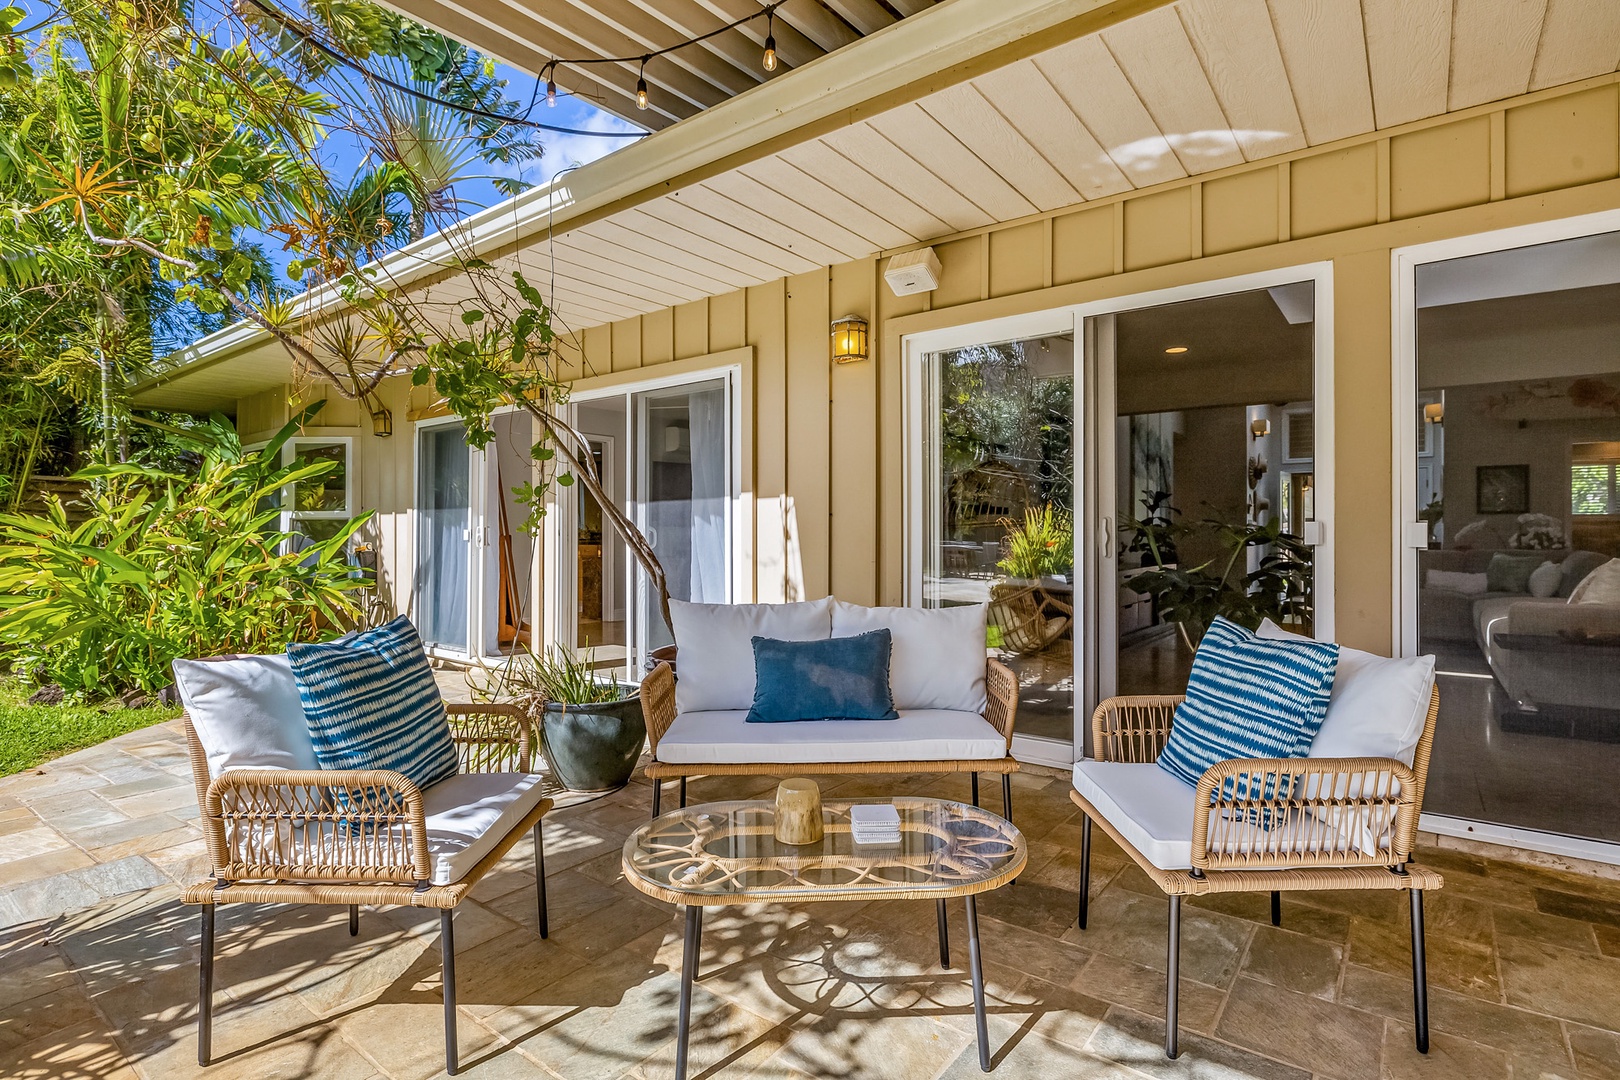 Honolulu Vacation Rentals, Hale Ho'omaha - There's plenty of seating on the private lanai to gather with your loved ones